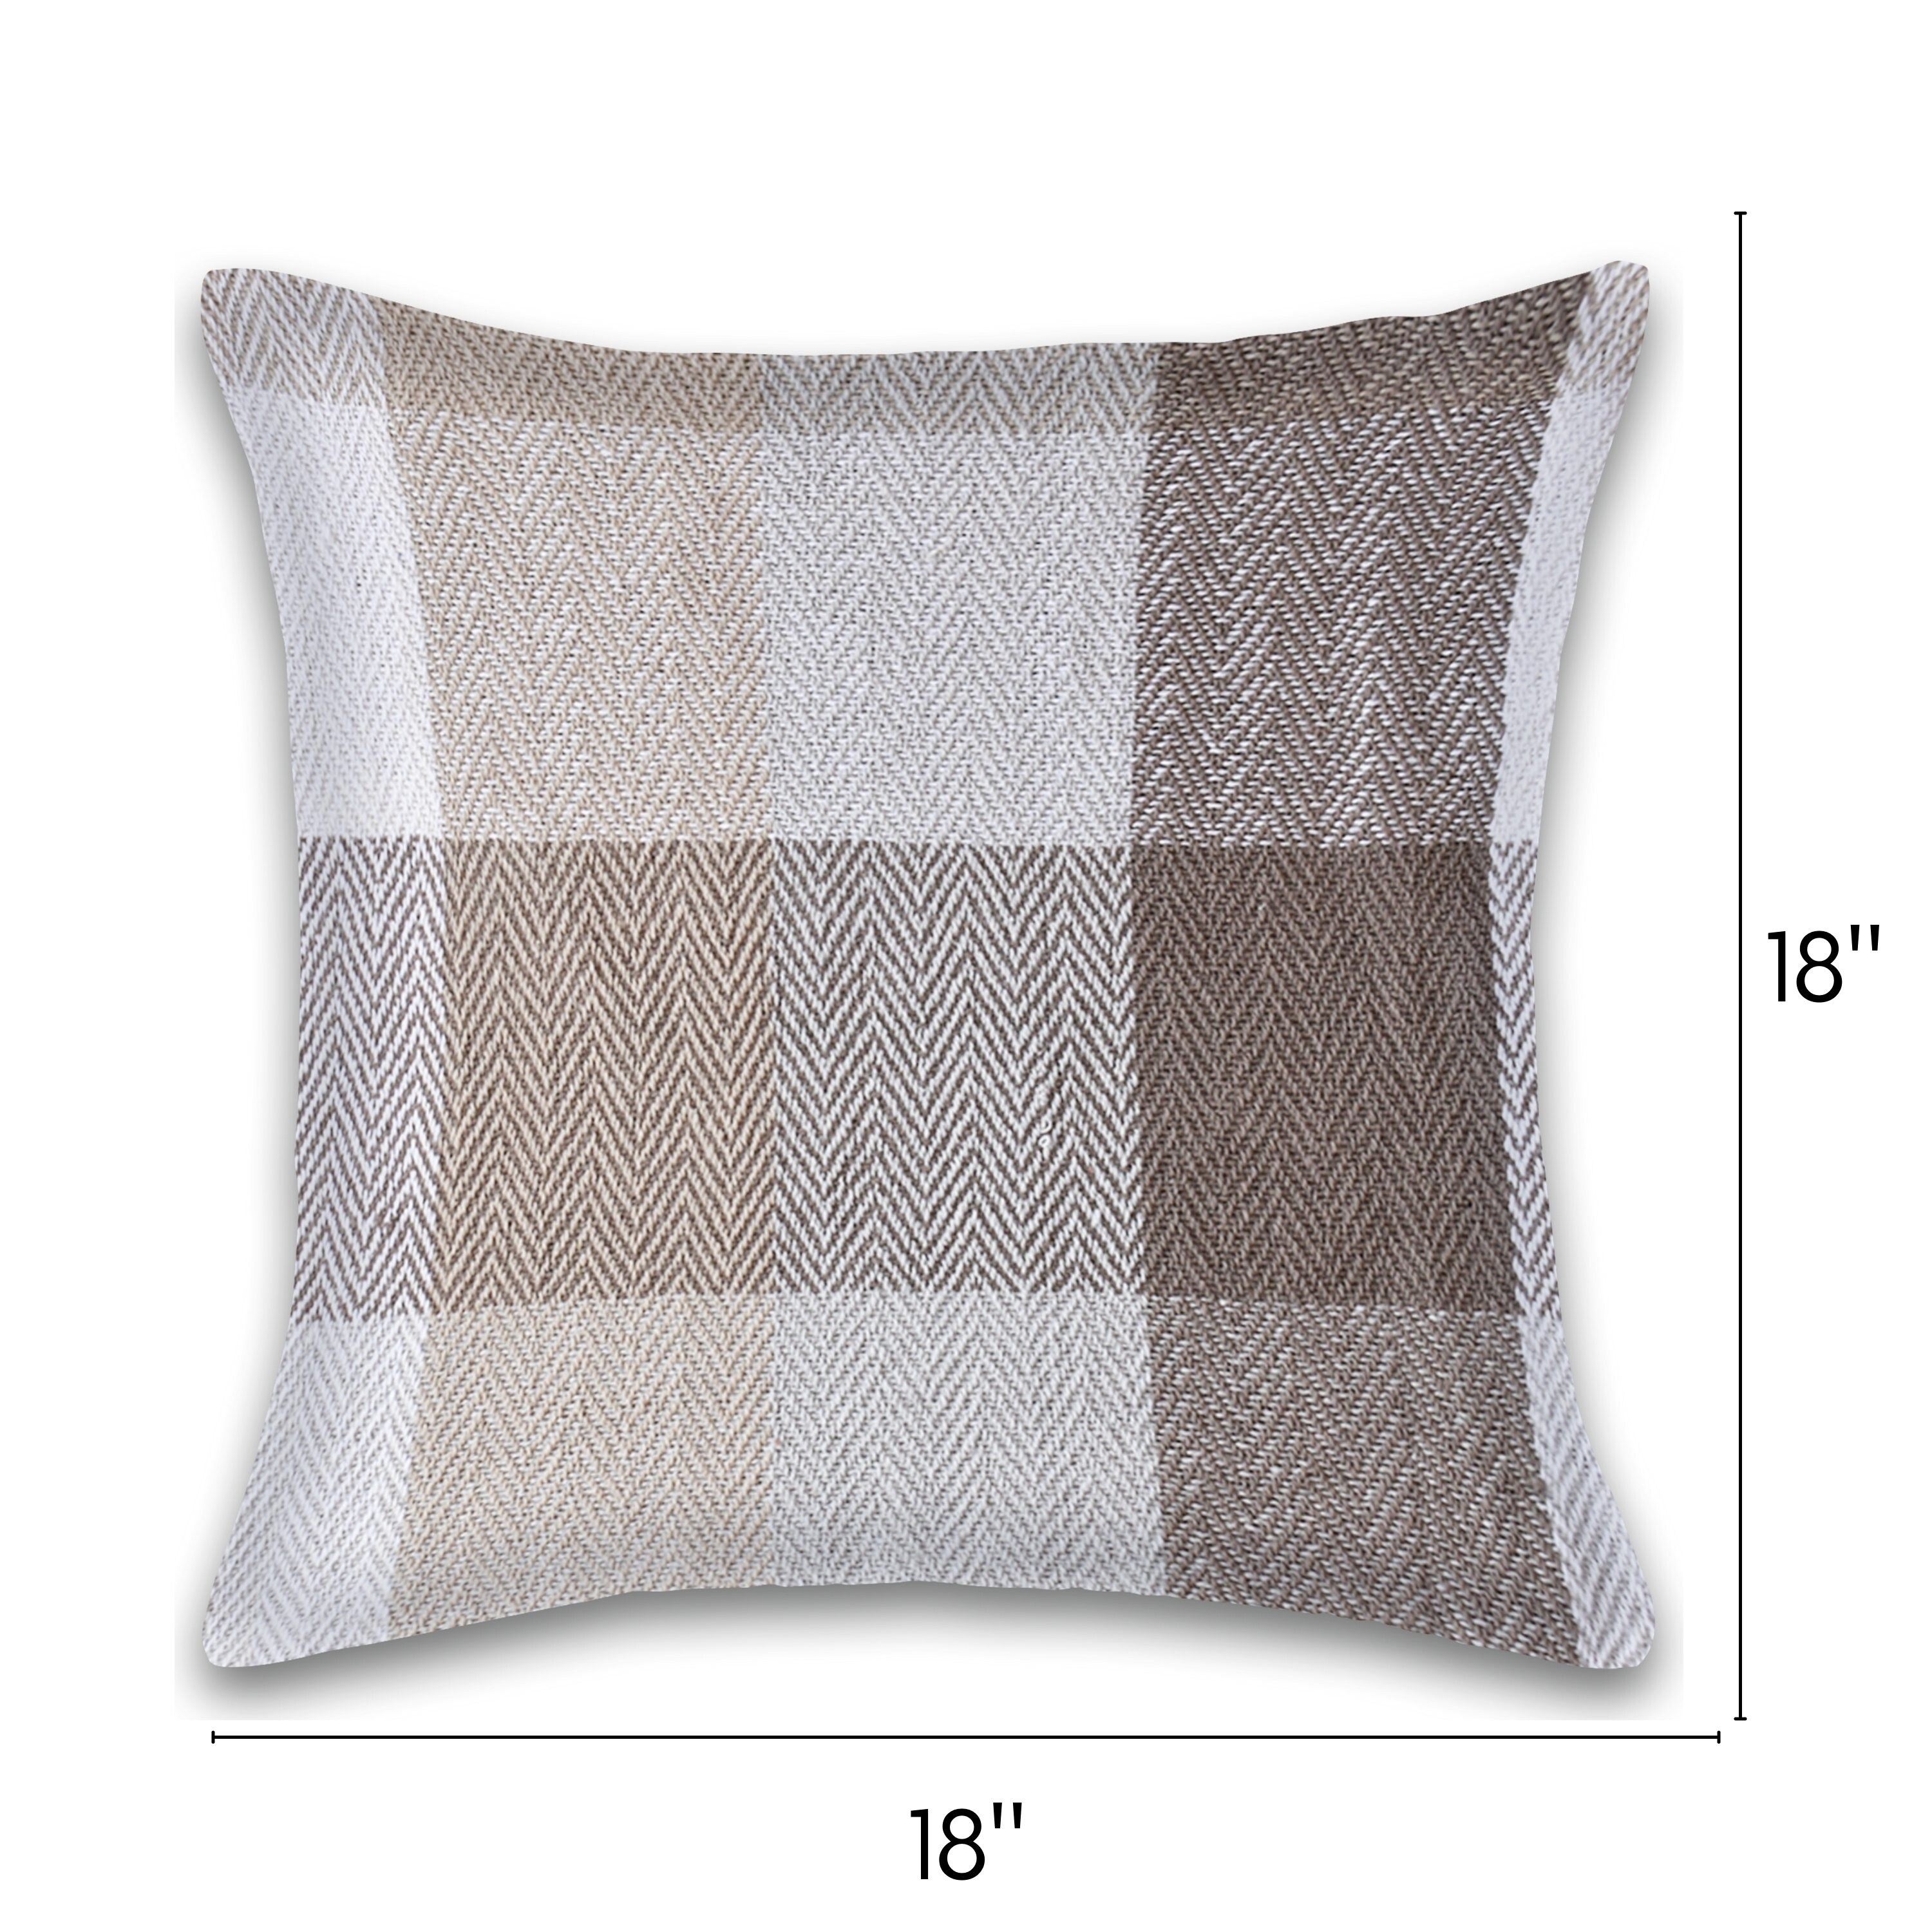 Fabstyles Herringbone Check Set of 2 Cotton Throw Pillows